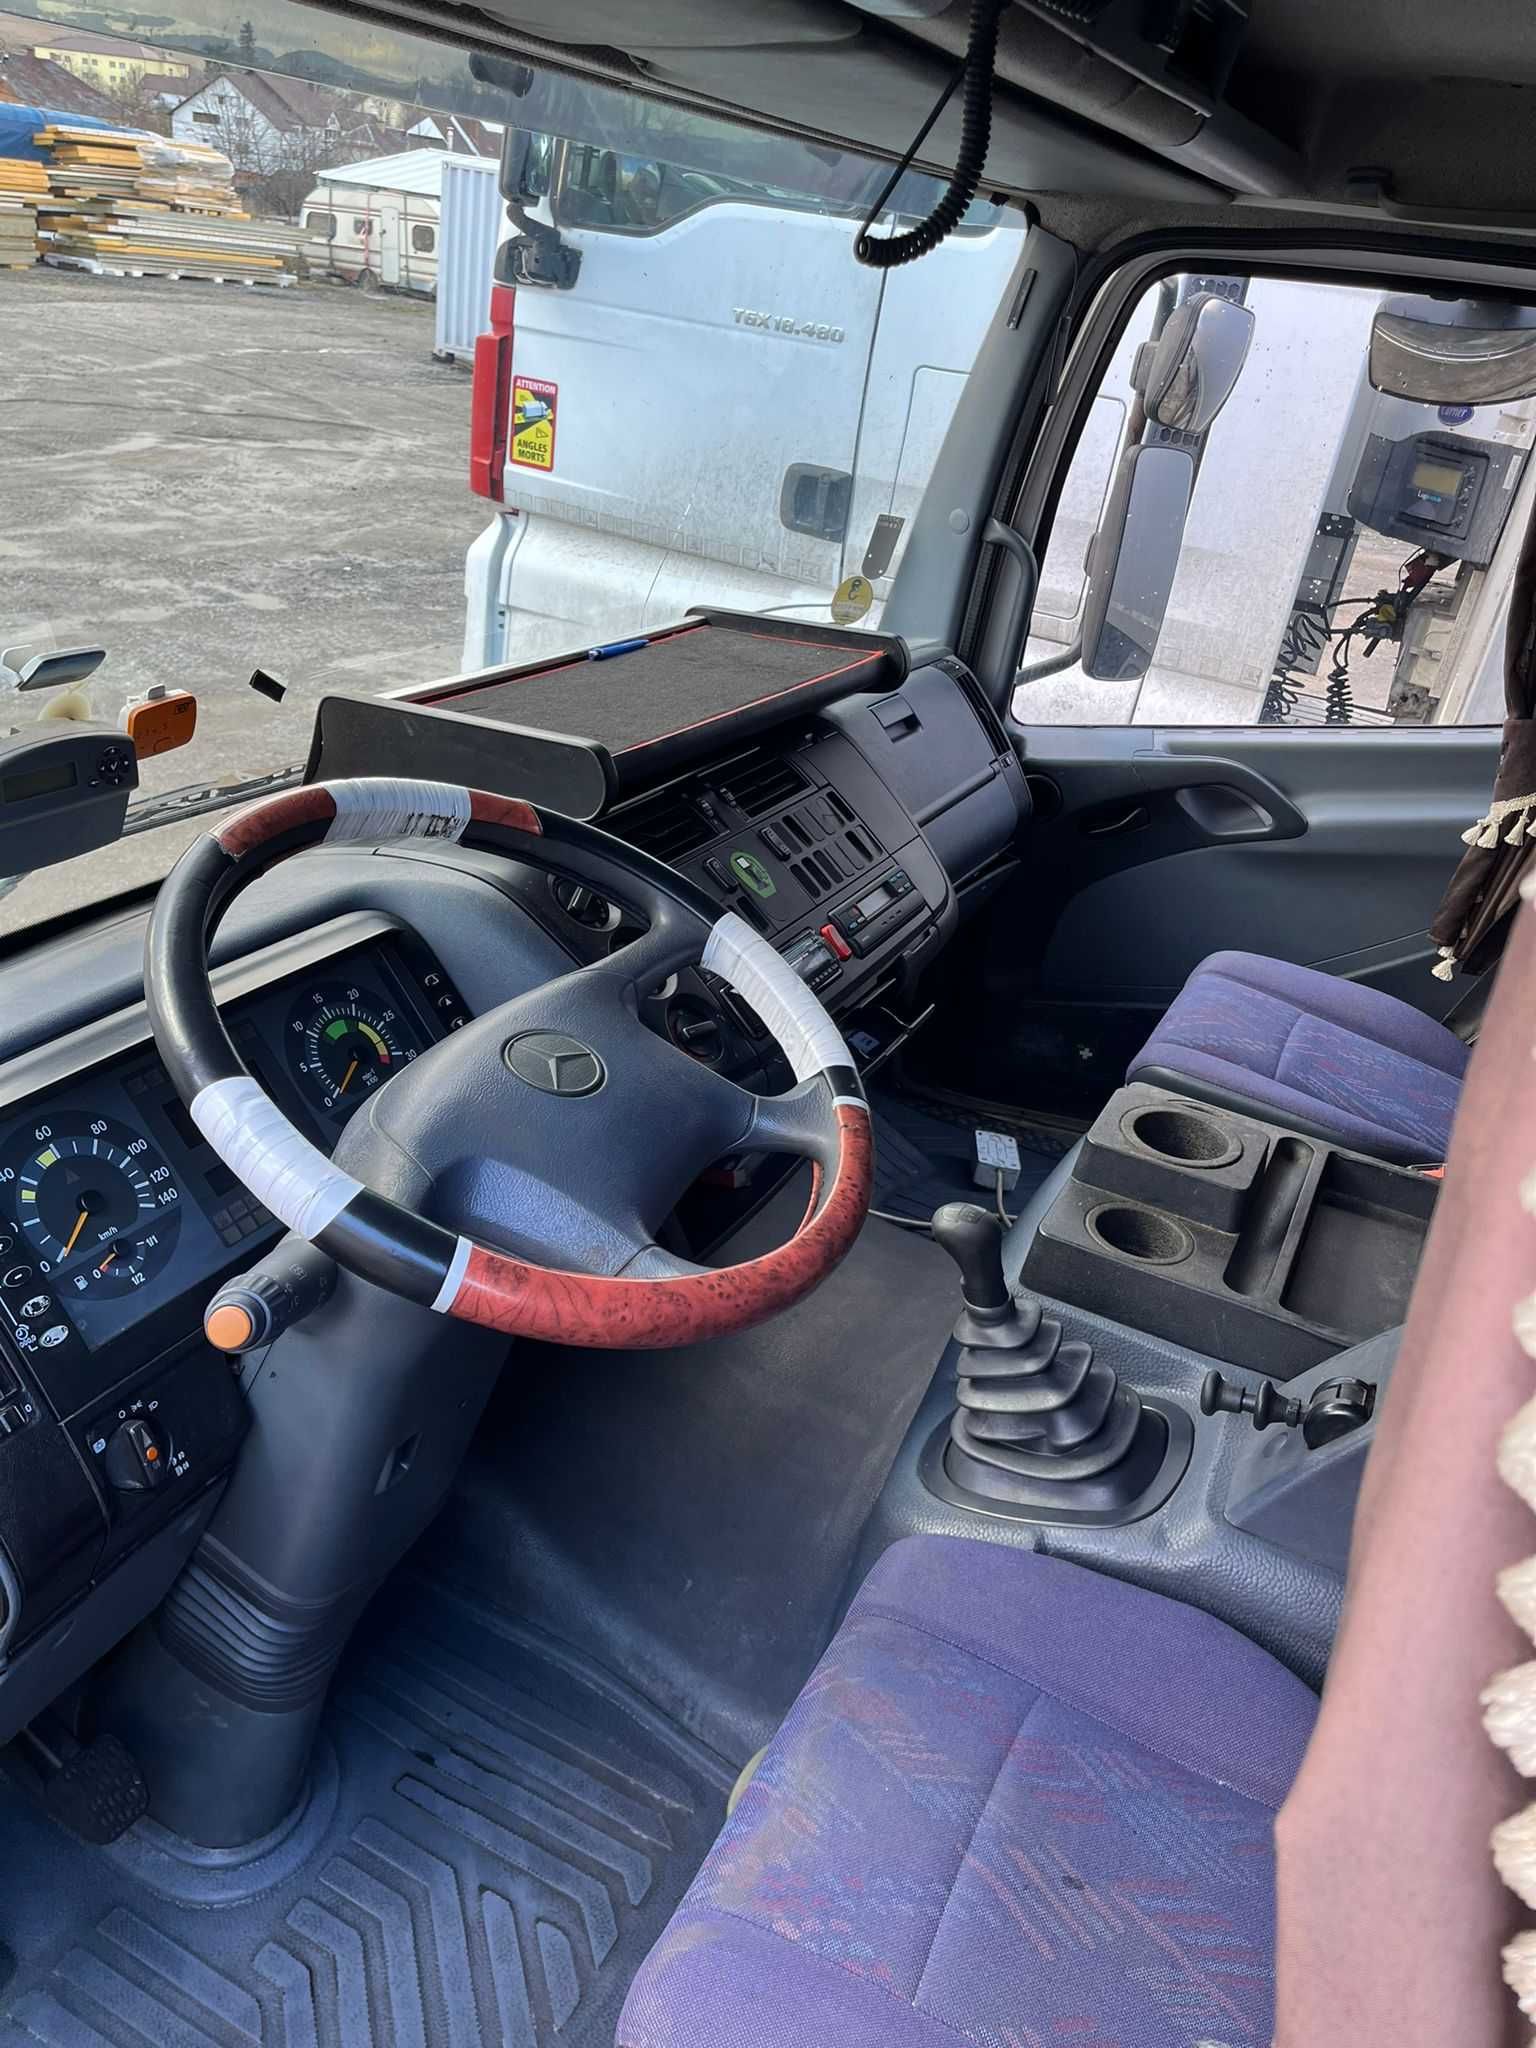 Vand Mercedes Benz Atego 7.5 to, an 2004